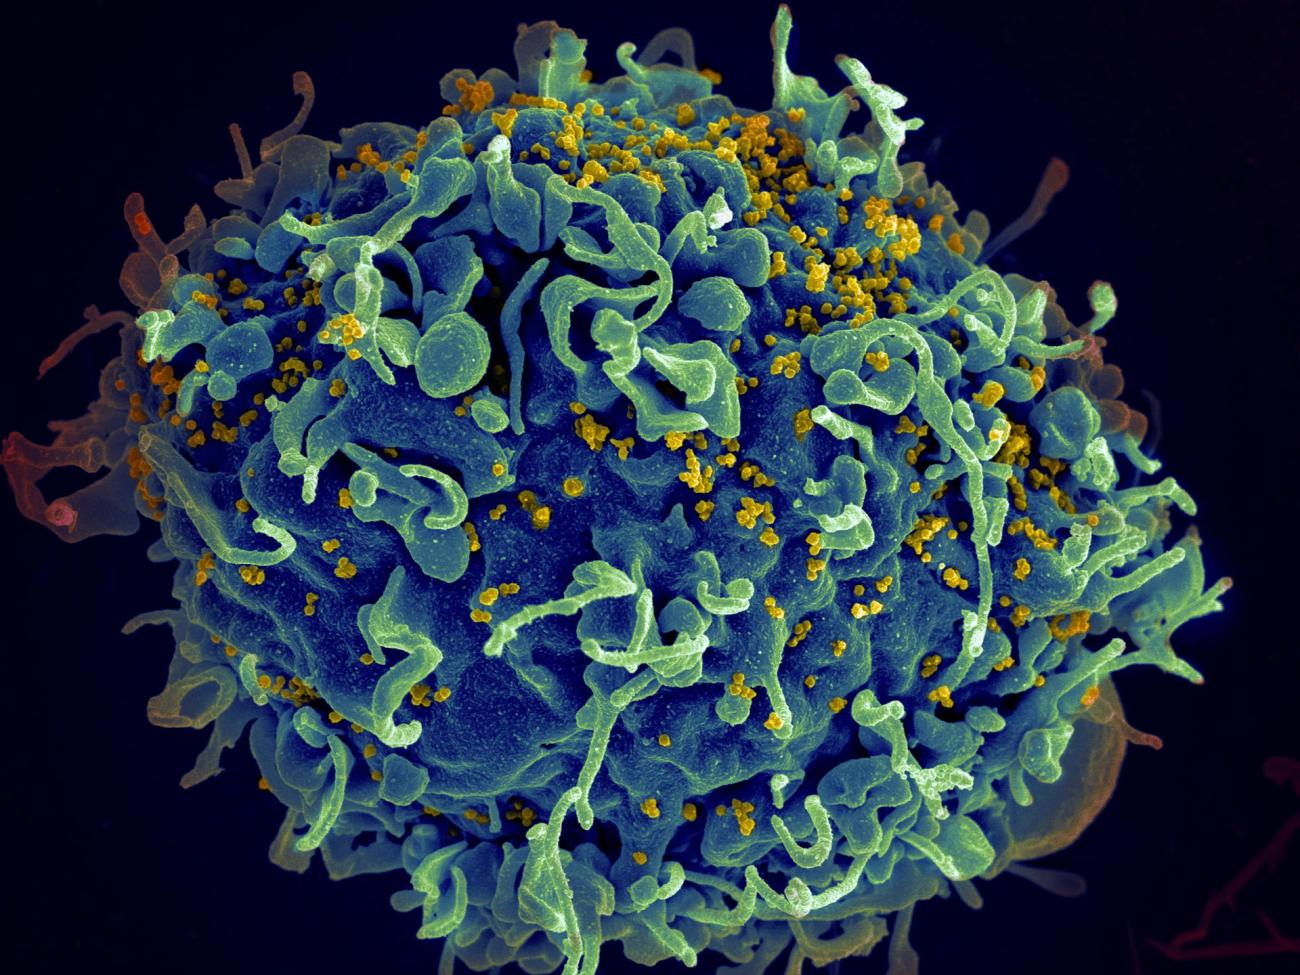 A human T cell, in blue, under attack by HIV, in yellow.